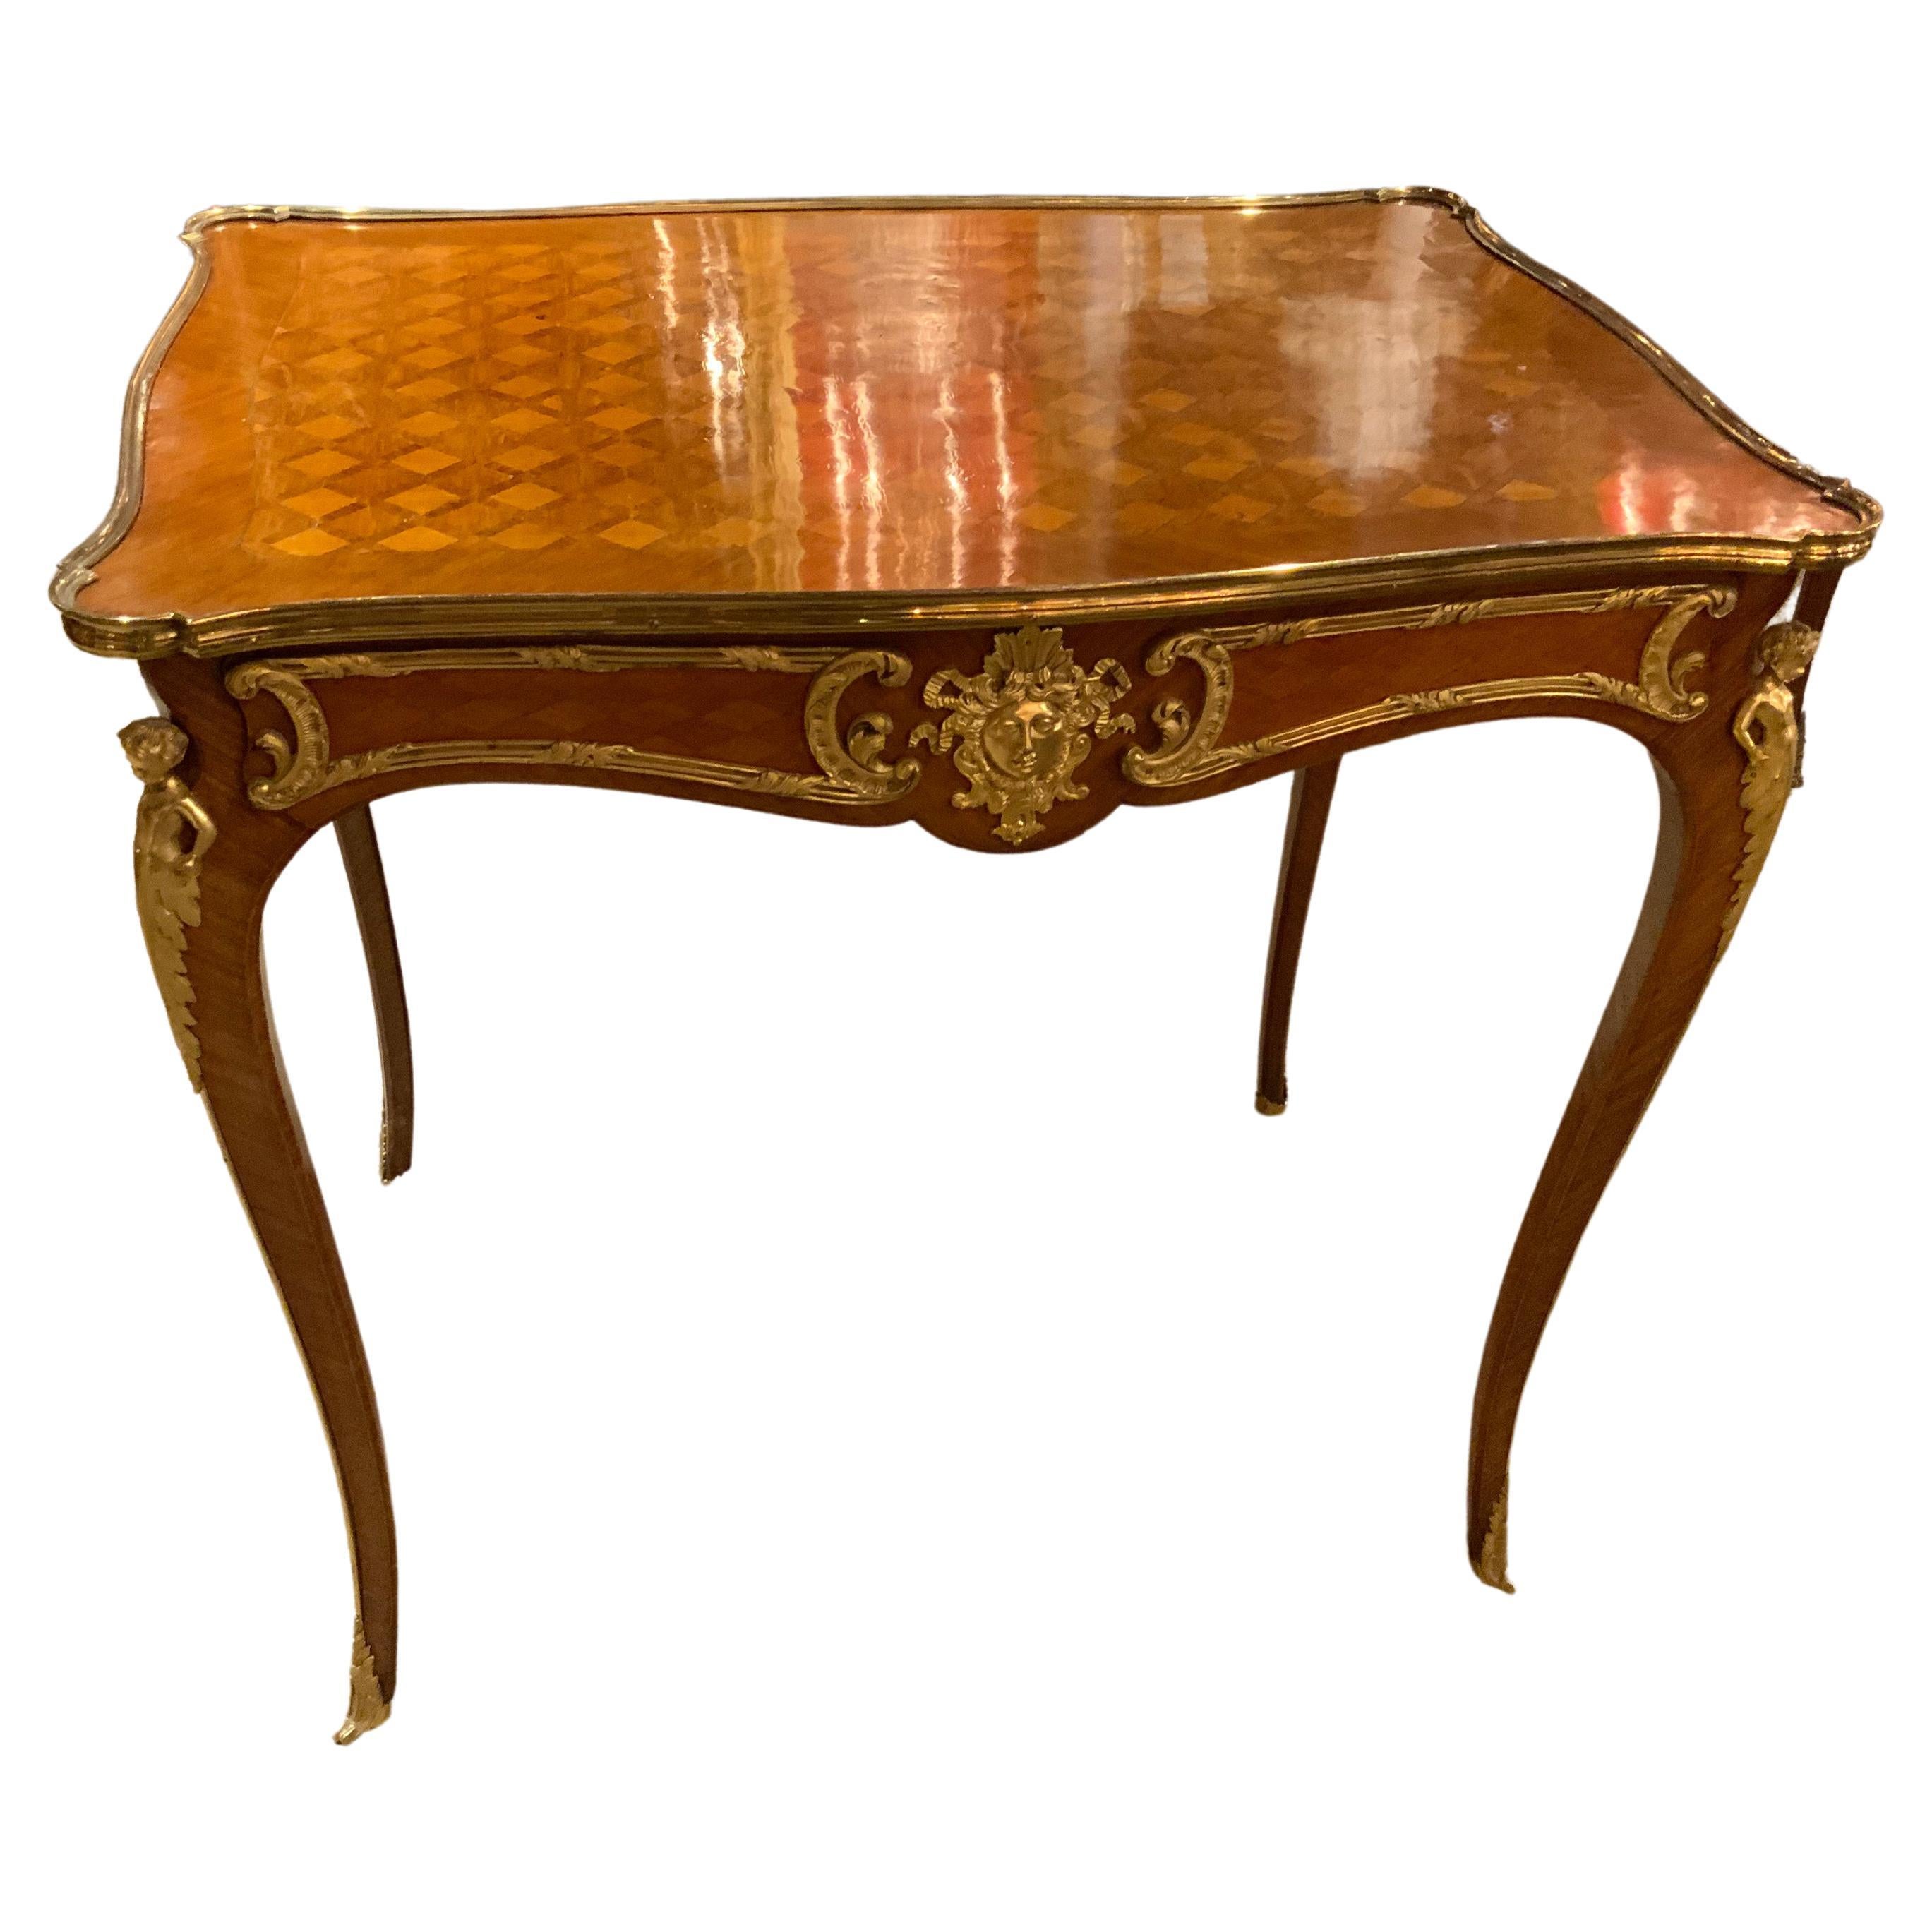 Fine French Marquetry Side Table with Gilt Bronze Mounts, Louis XVI-Style For Sale